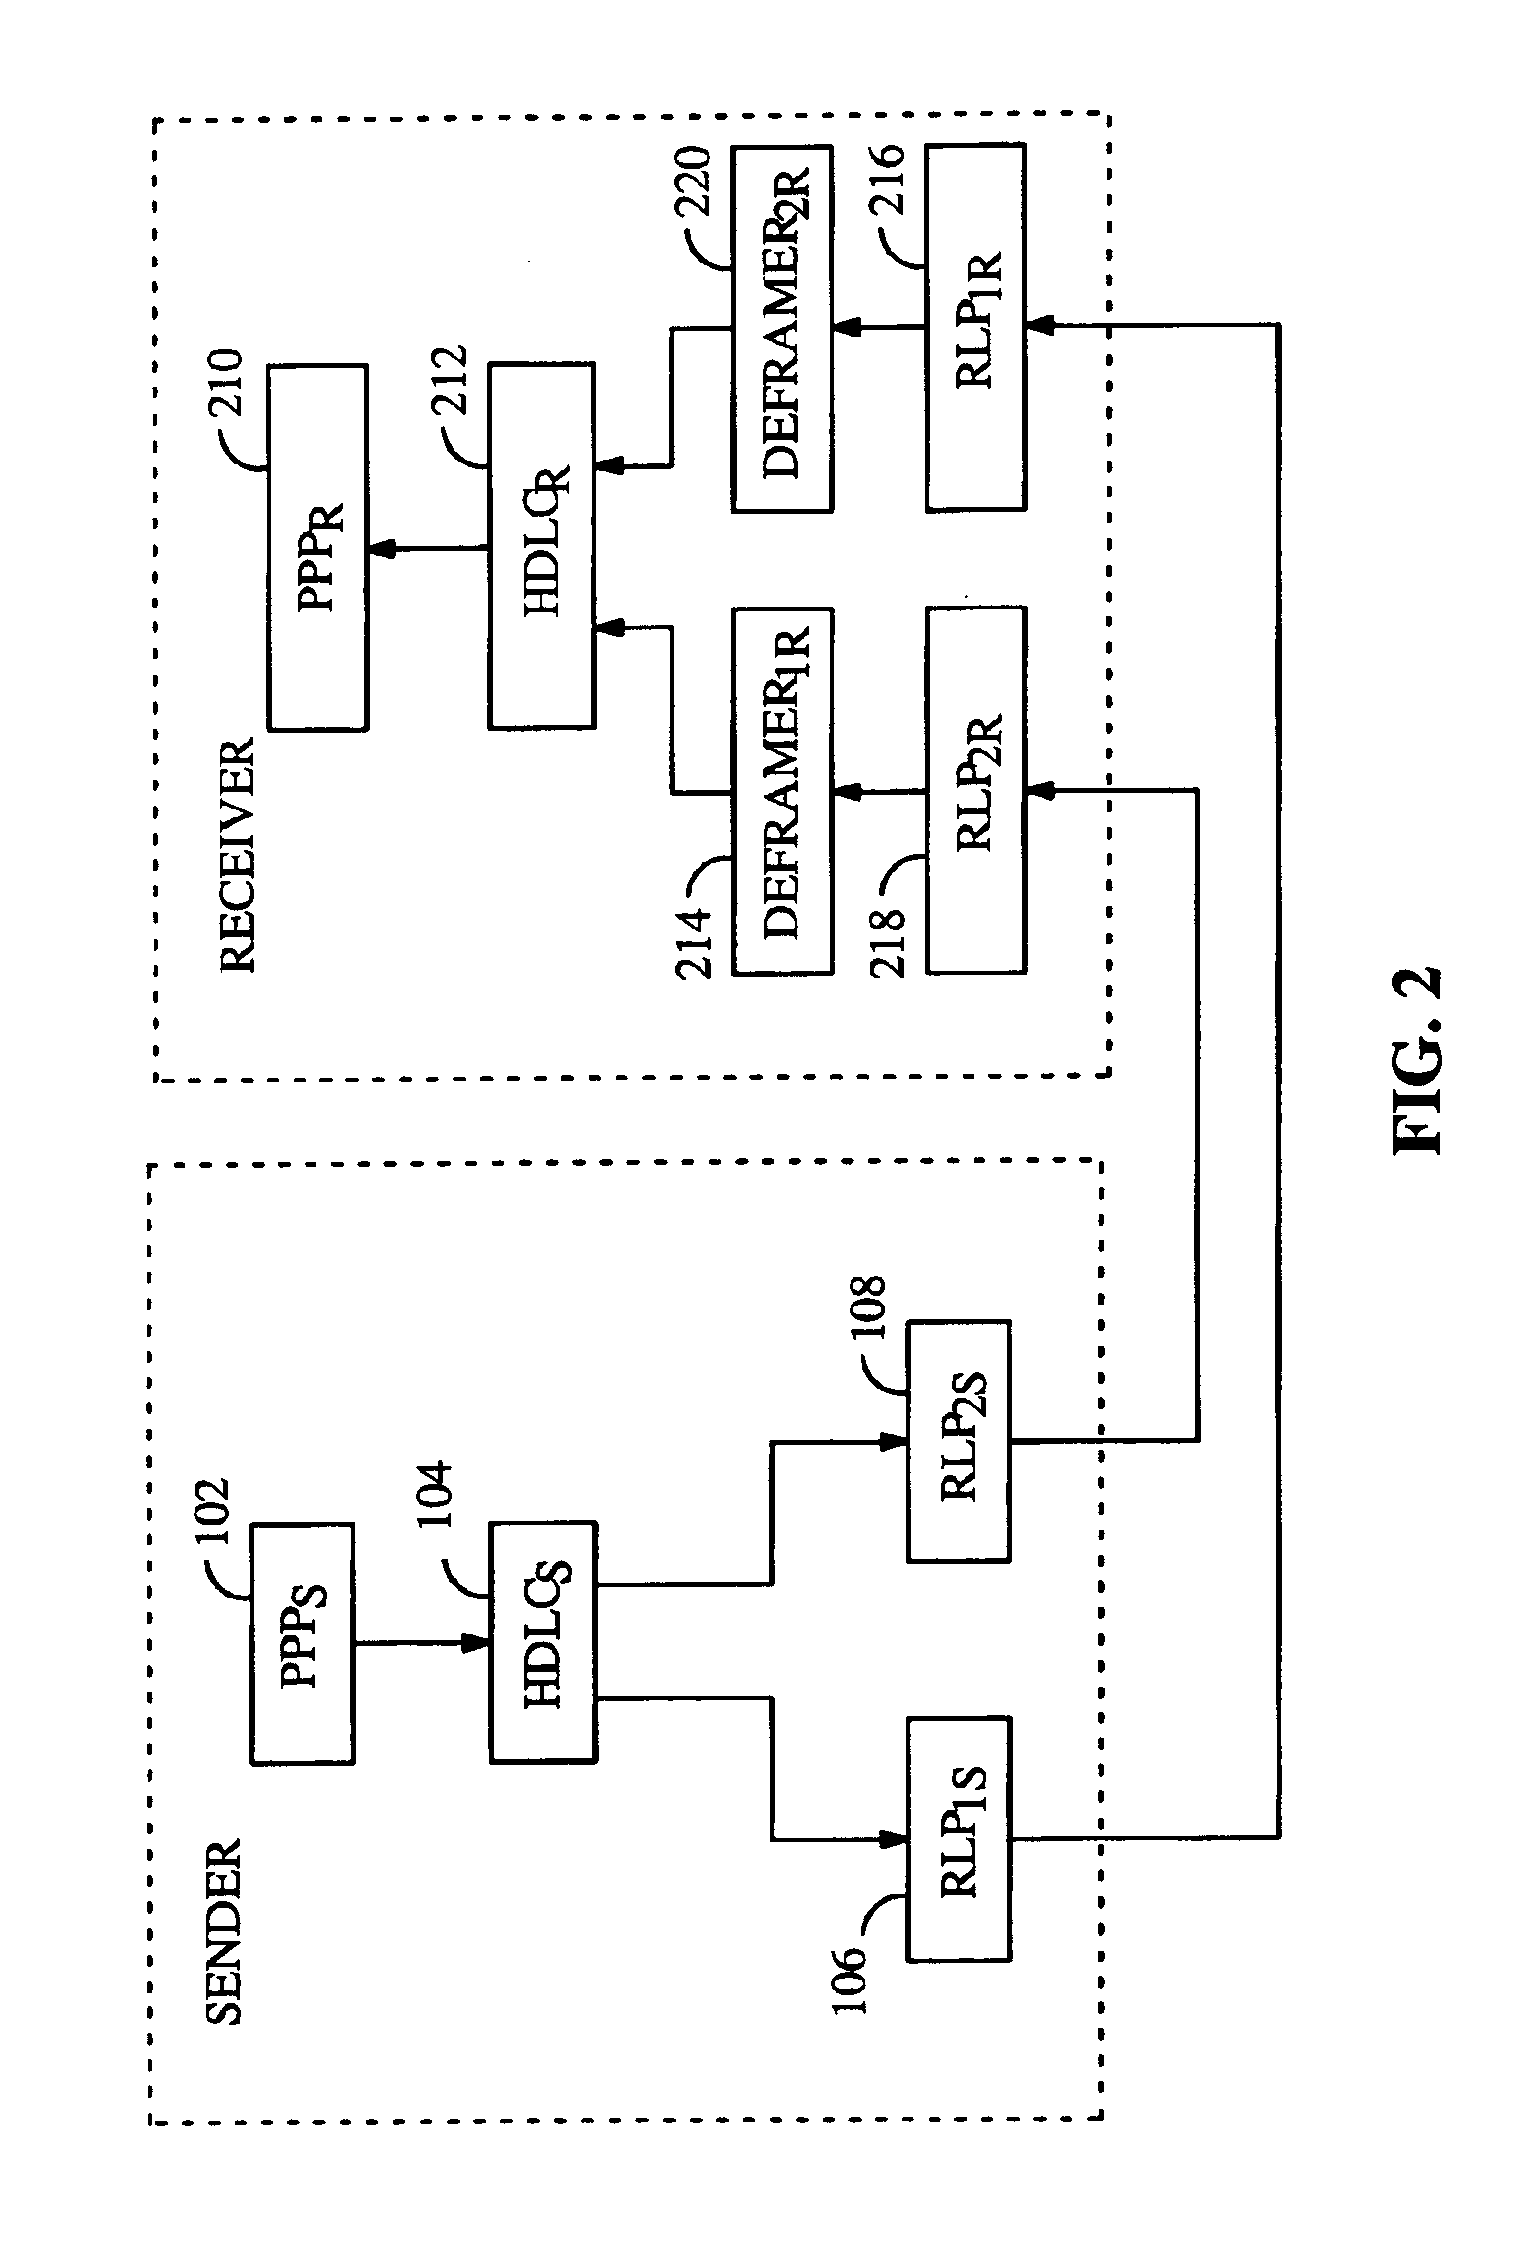 Method and apparatus for providing multiple quality of service levels in a wireless packet data services connection